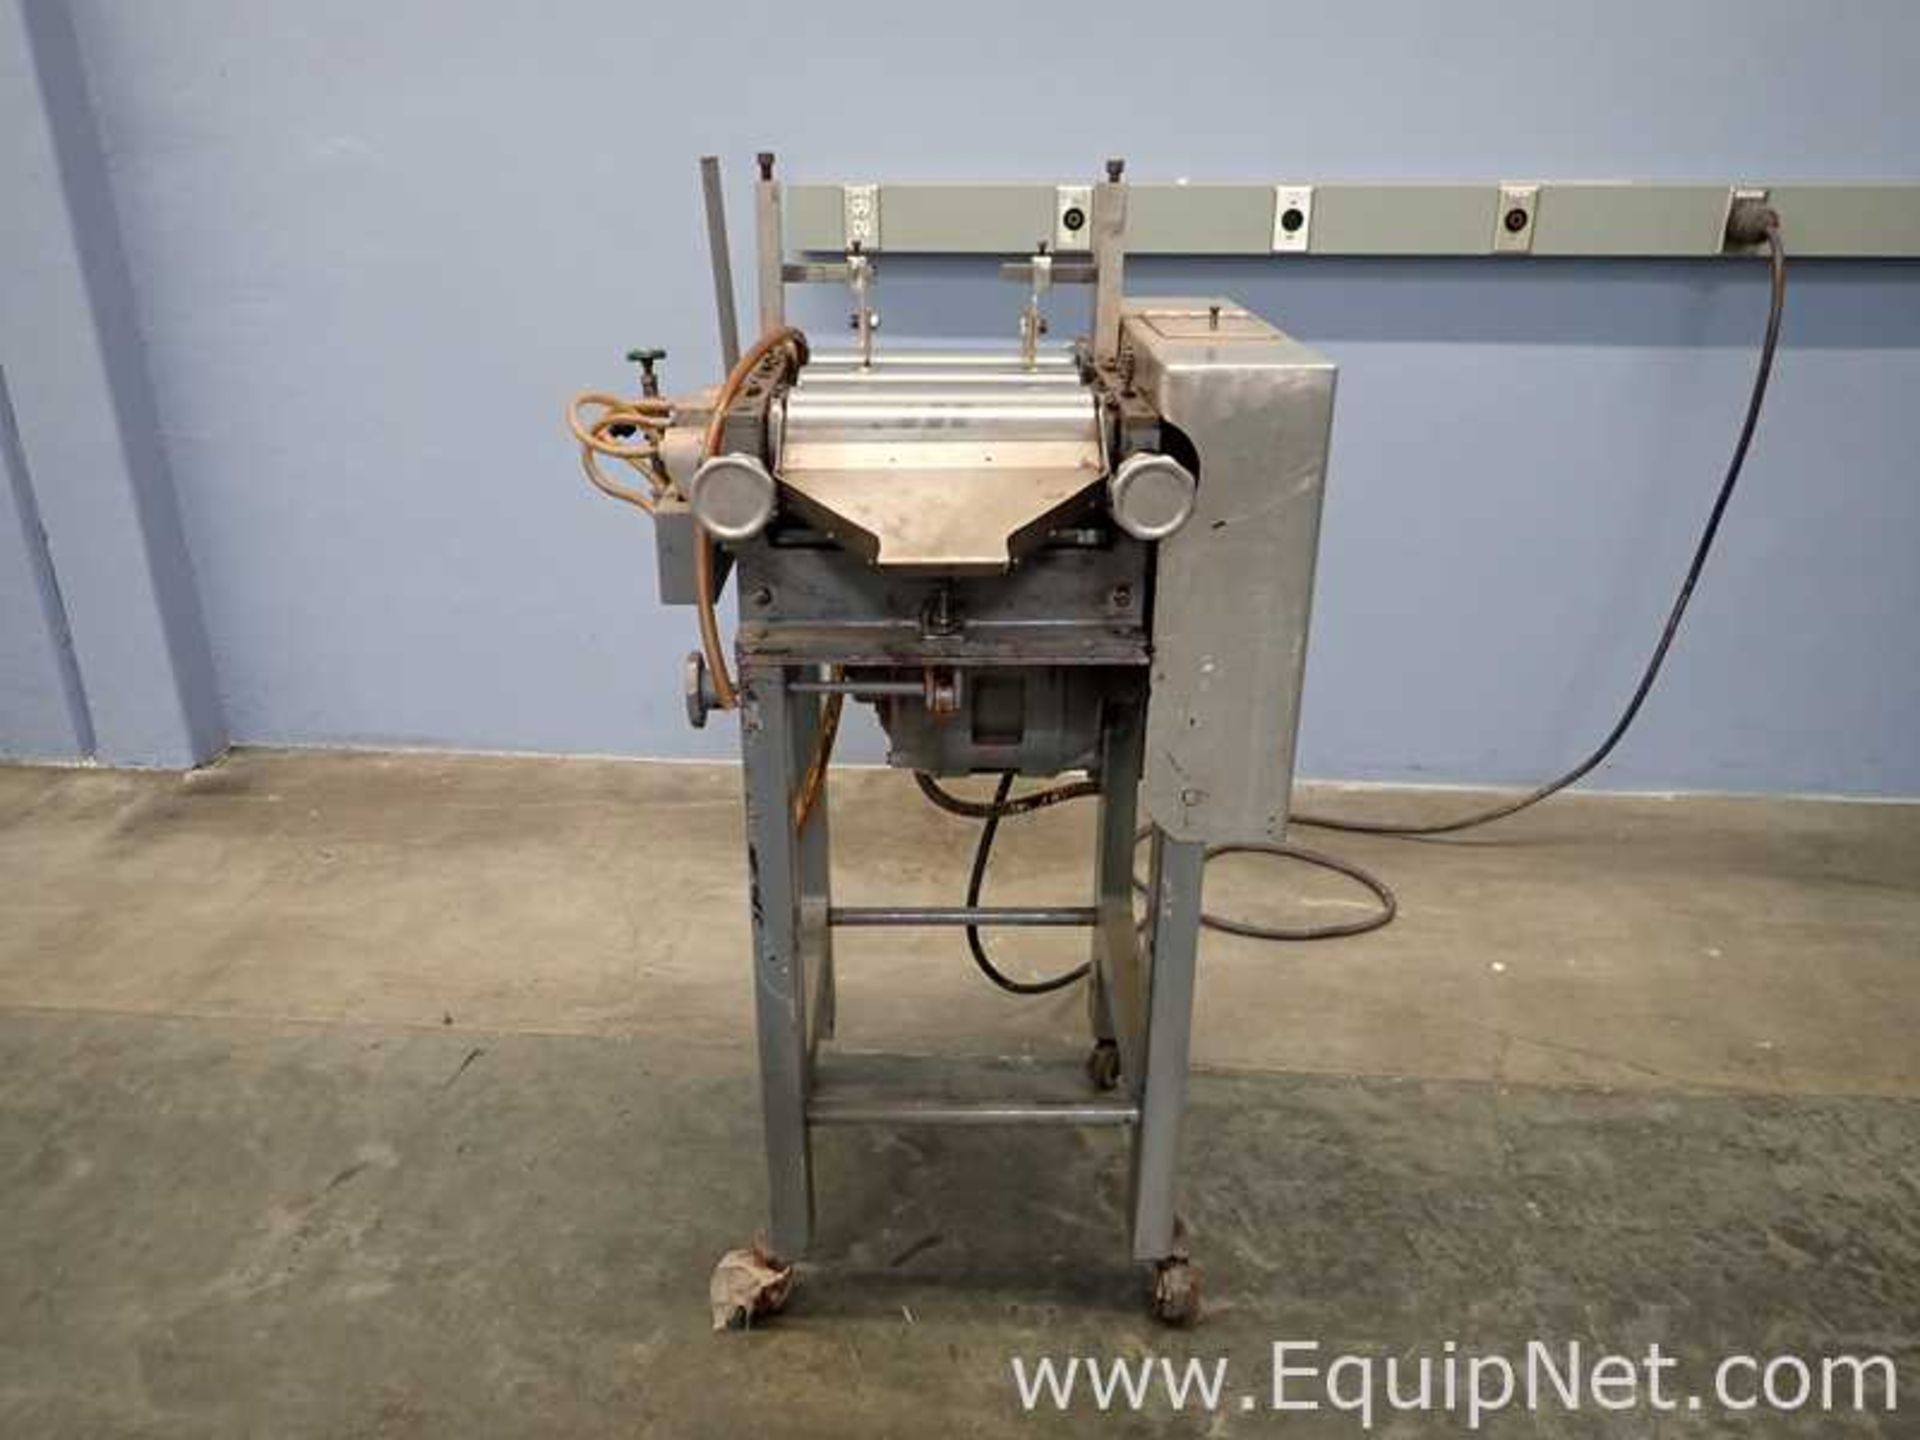 DESCRIPTION: This three roll mill is appx 12" in length EQUIPNET LISTING # 720238 HANDLING FEE: $